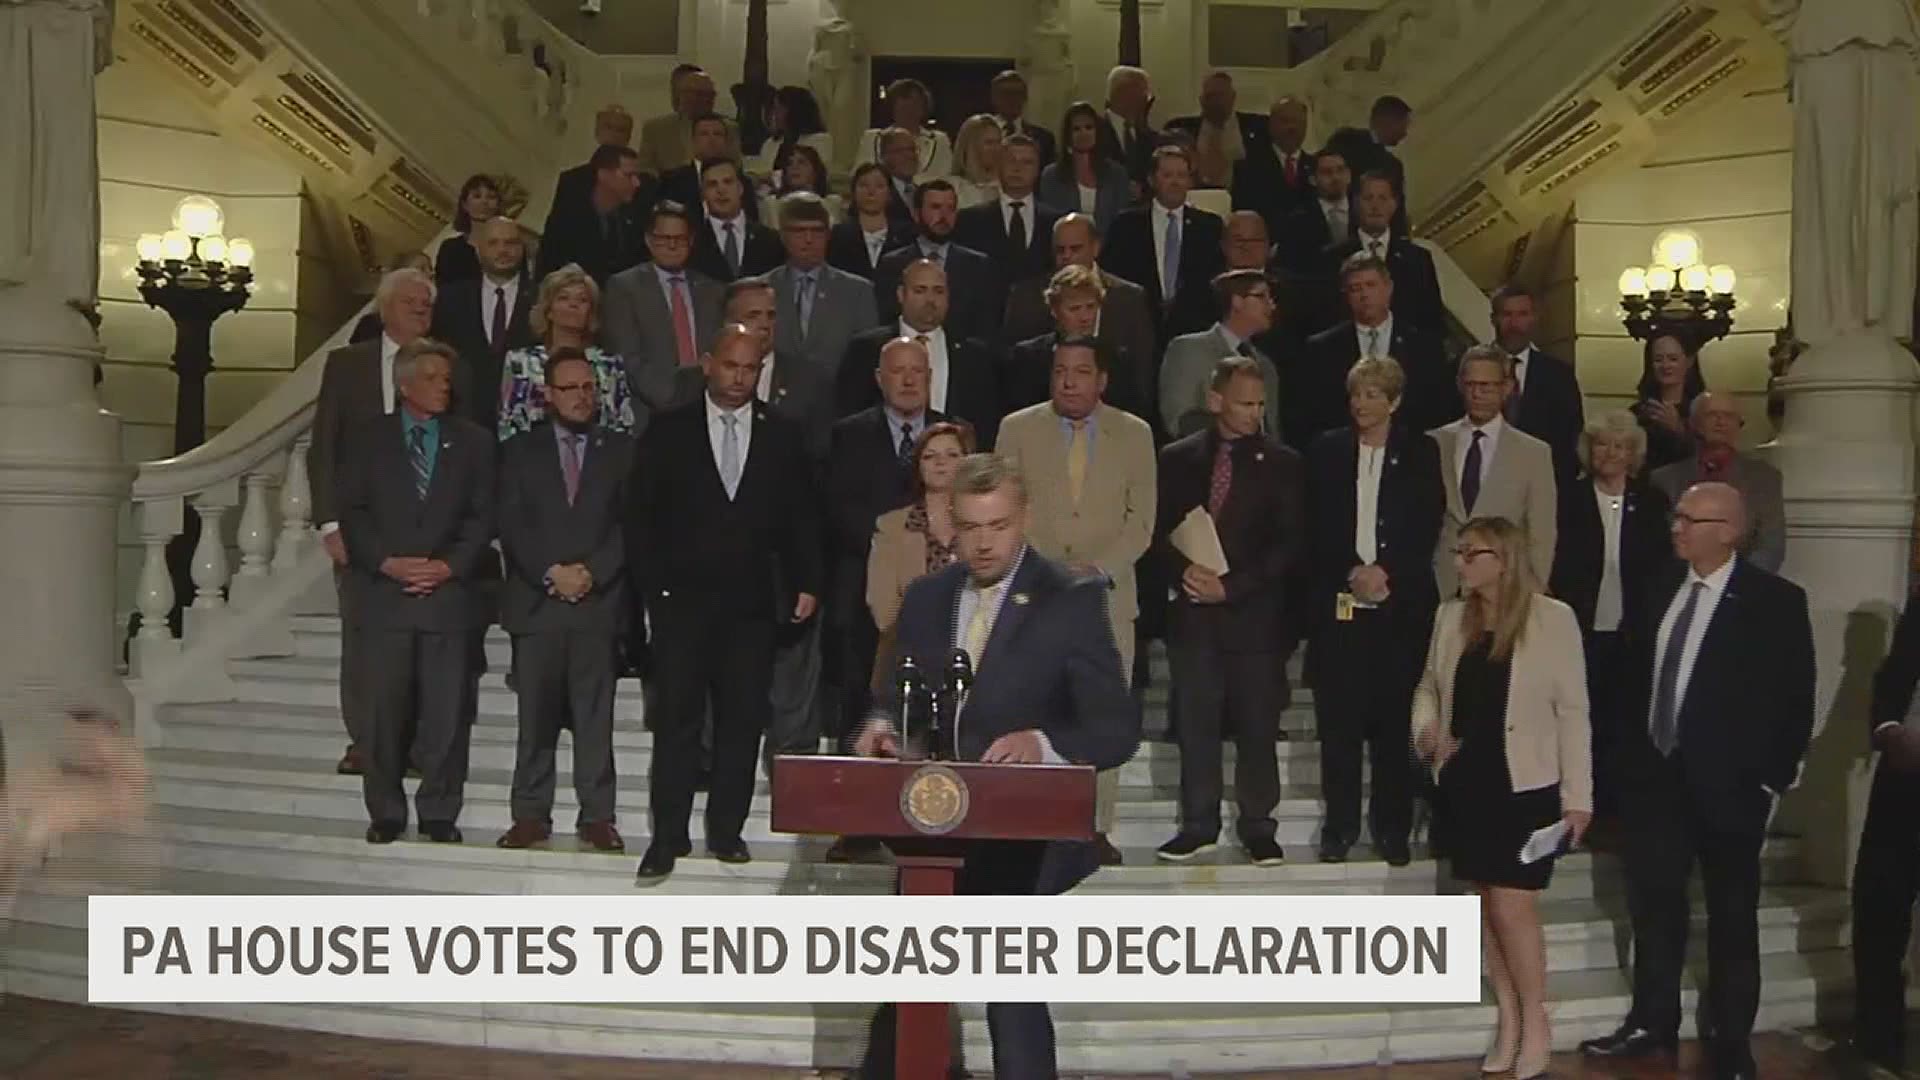 The Pennsylvania House voted on June 8 to end Gov. Tom Wolf’s COVID emergency disaster declaration.